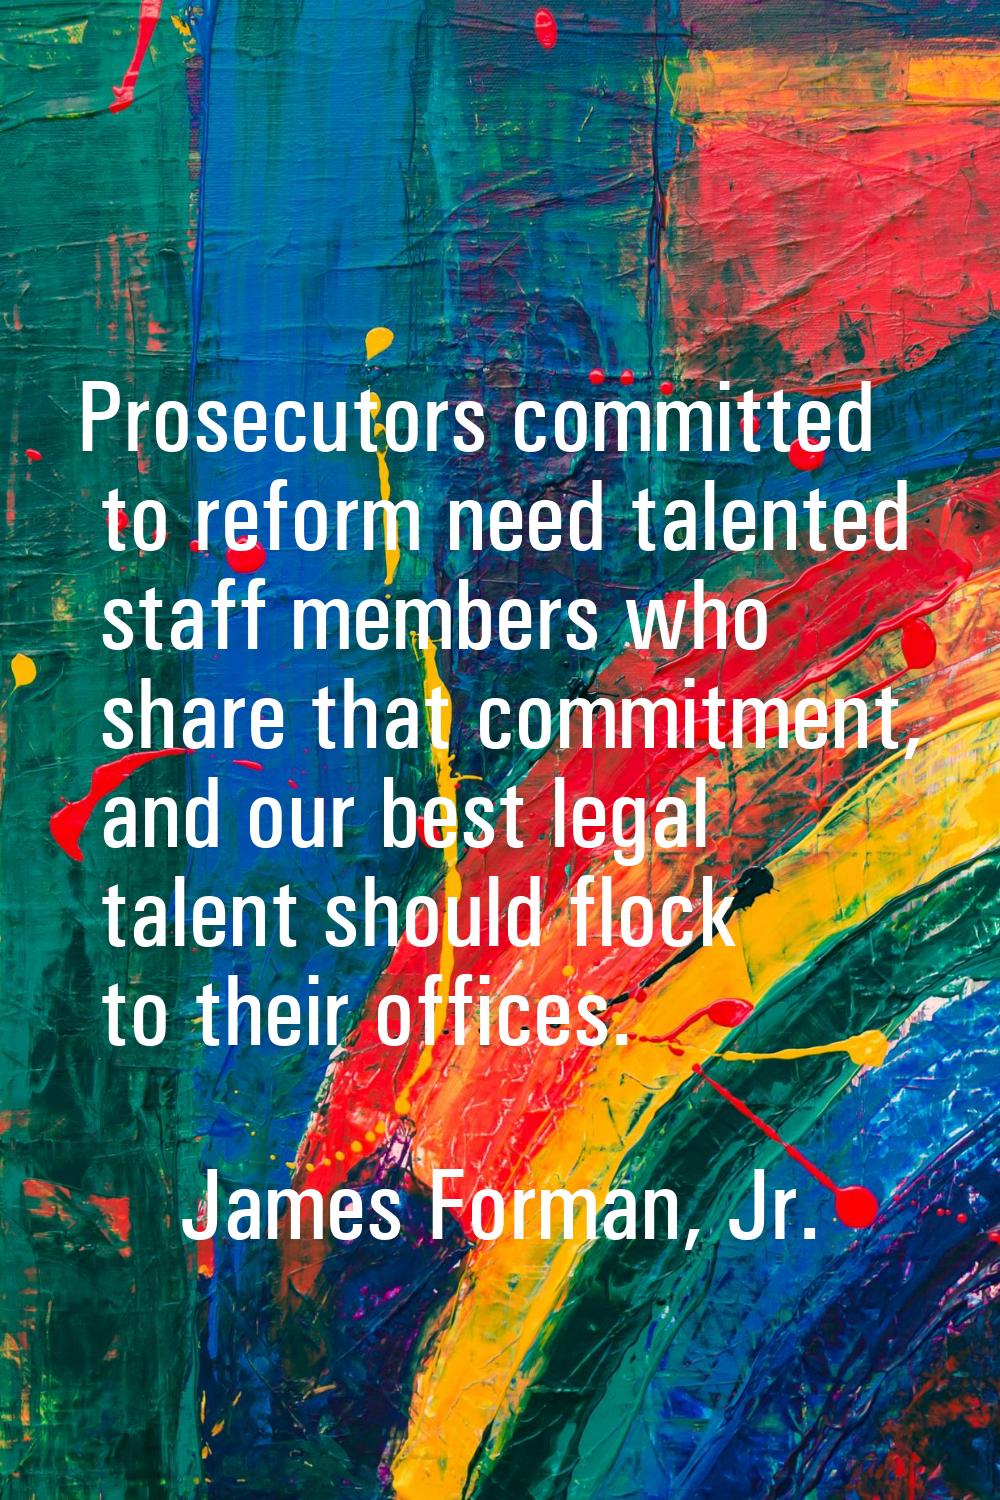 Prosecutors committed to reform need talented staff members who share that commitment, and our best